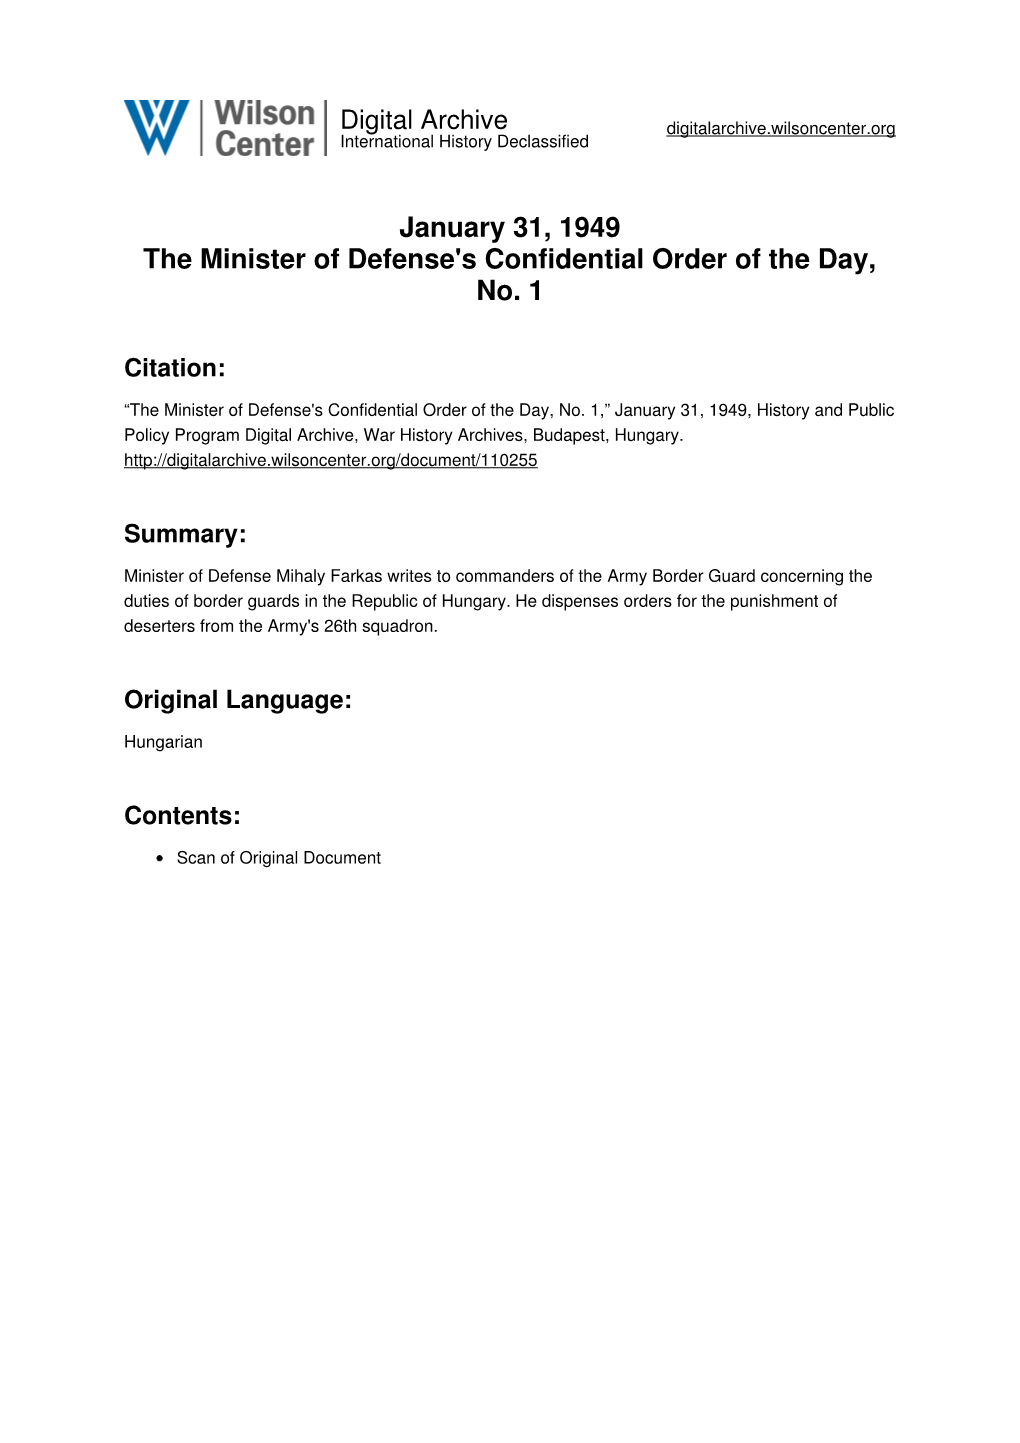 January 31, 1949 the Minister of Defense's Confidential Order of the Day, No